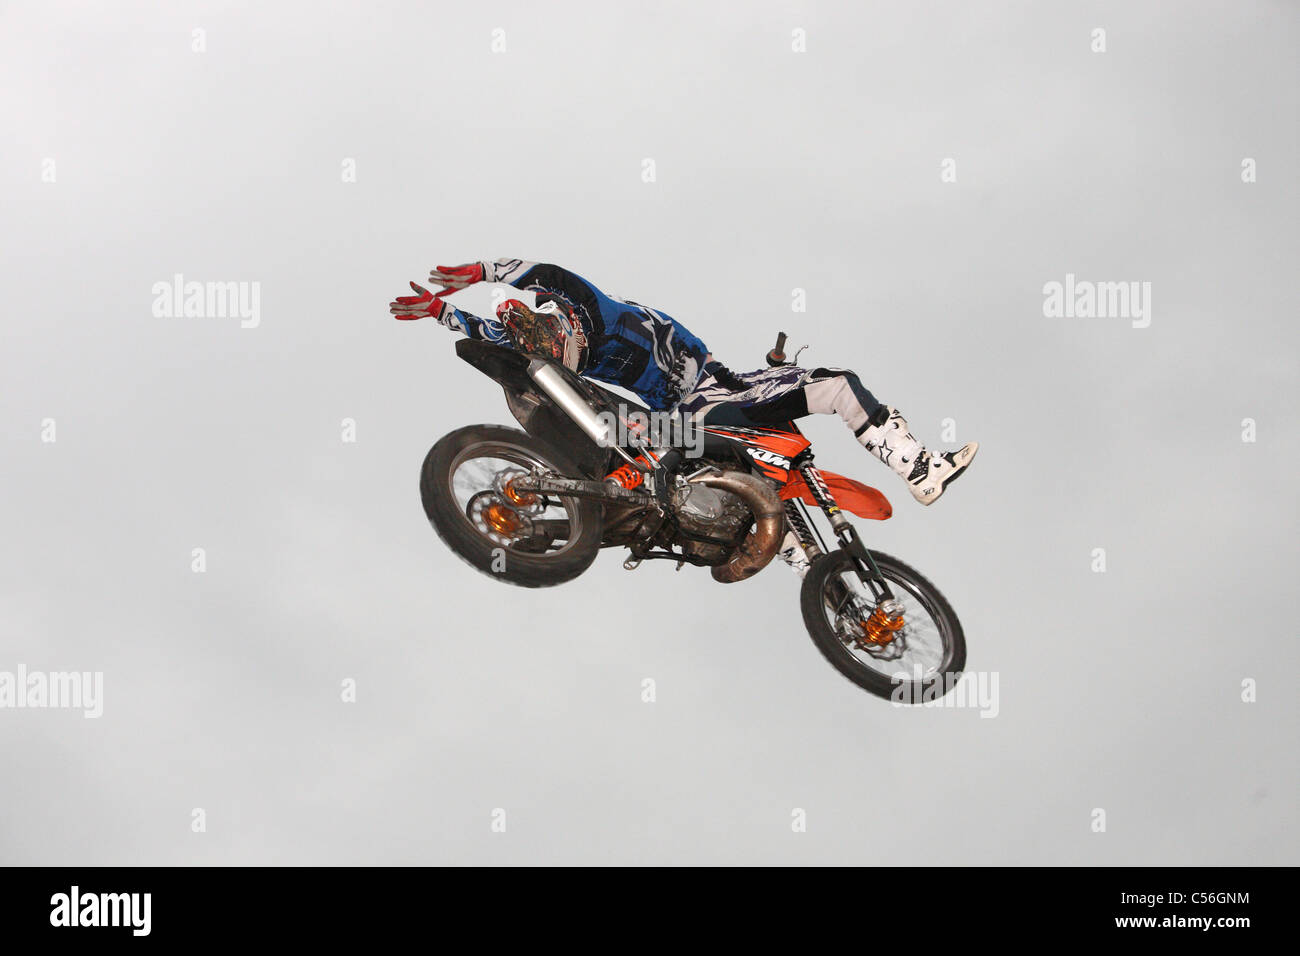 Moto Freestyle FMX riders in mid air Banque D'Images